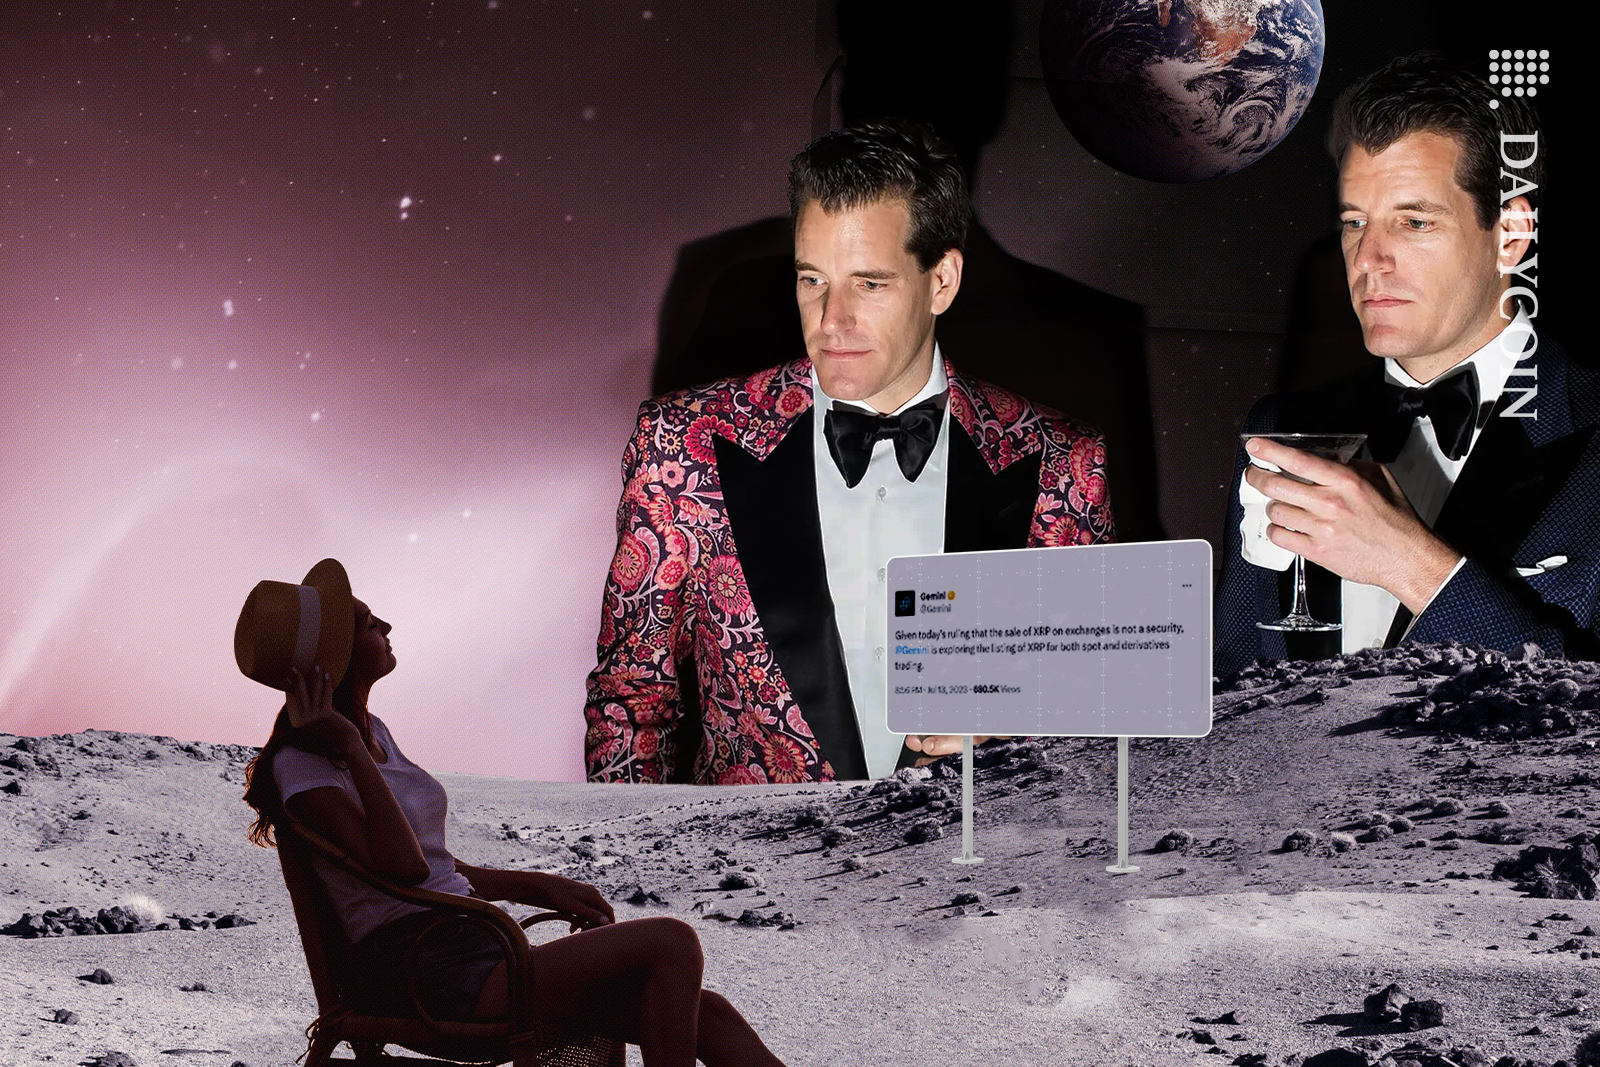 Winklevoss twins looking at the lady looking at the sign of their Twitter status.